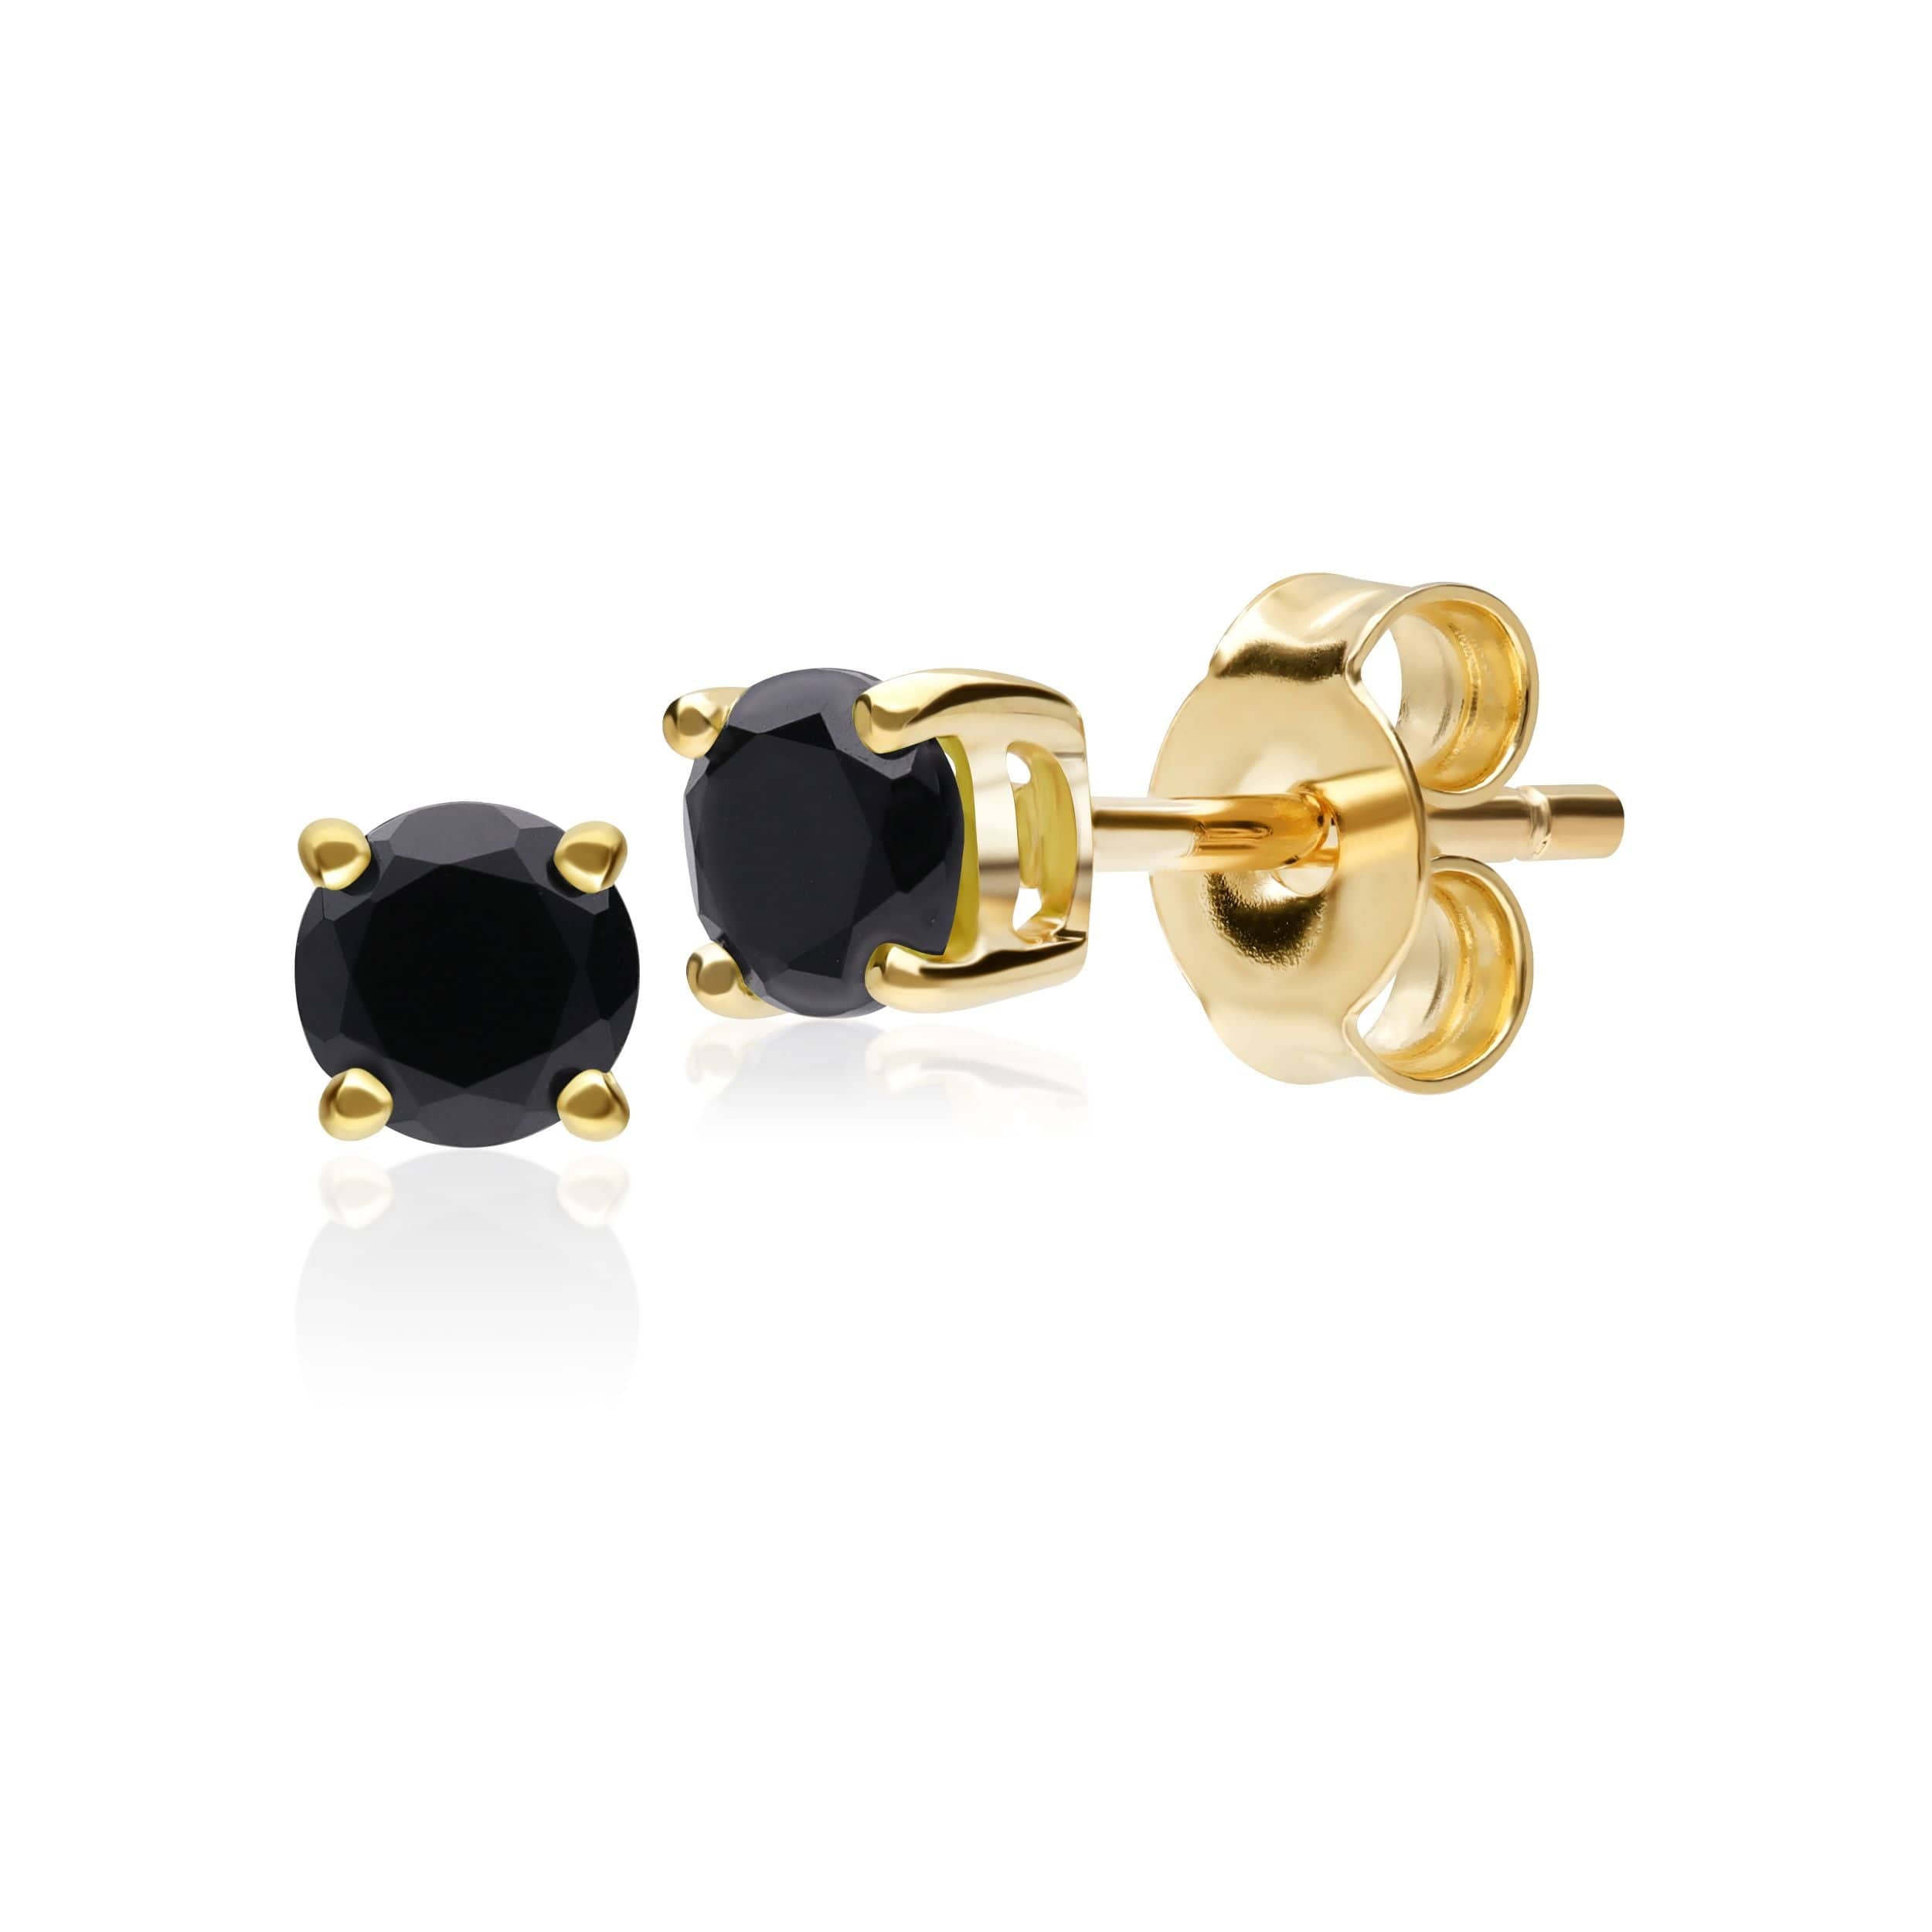 183E0083339 Classic Round Black Onyx Stud Earrings in 9ct Yellow Gold 1